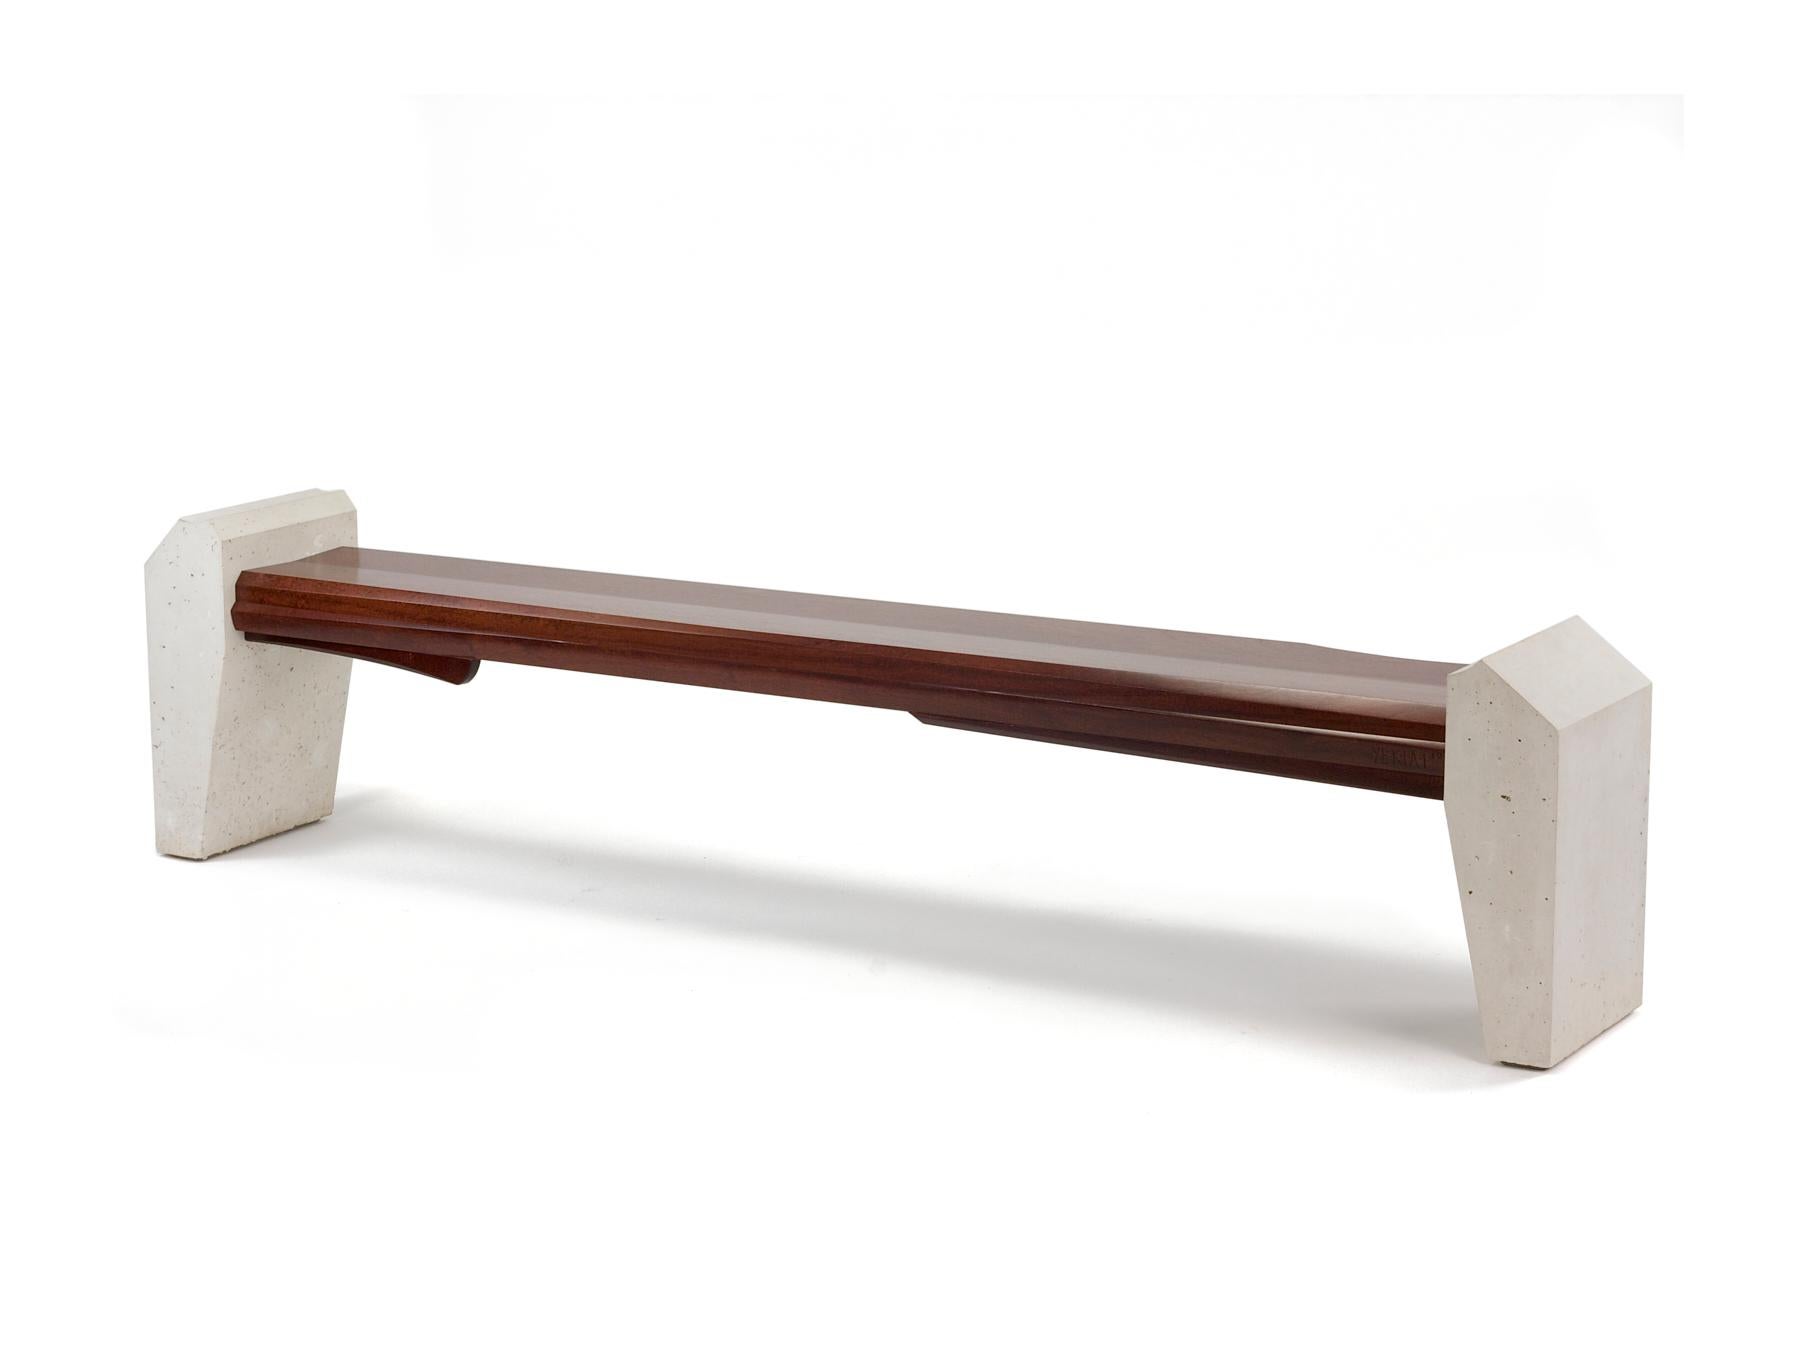 Two white cast concrete legs embrace a sculptural bundle of oxidize a Sapele wood. The wooden seat is elegant, robust and delicate at the same time. Much of this comes from the narrowness of this bench and it's length. It's like a breath of fresh